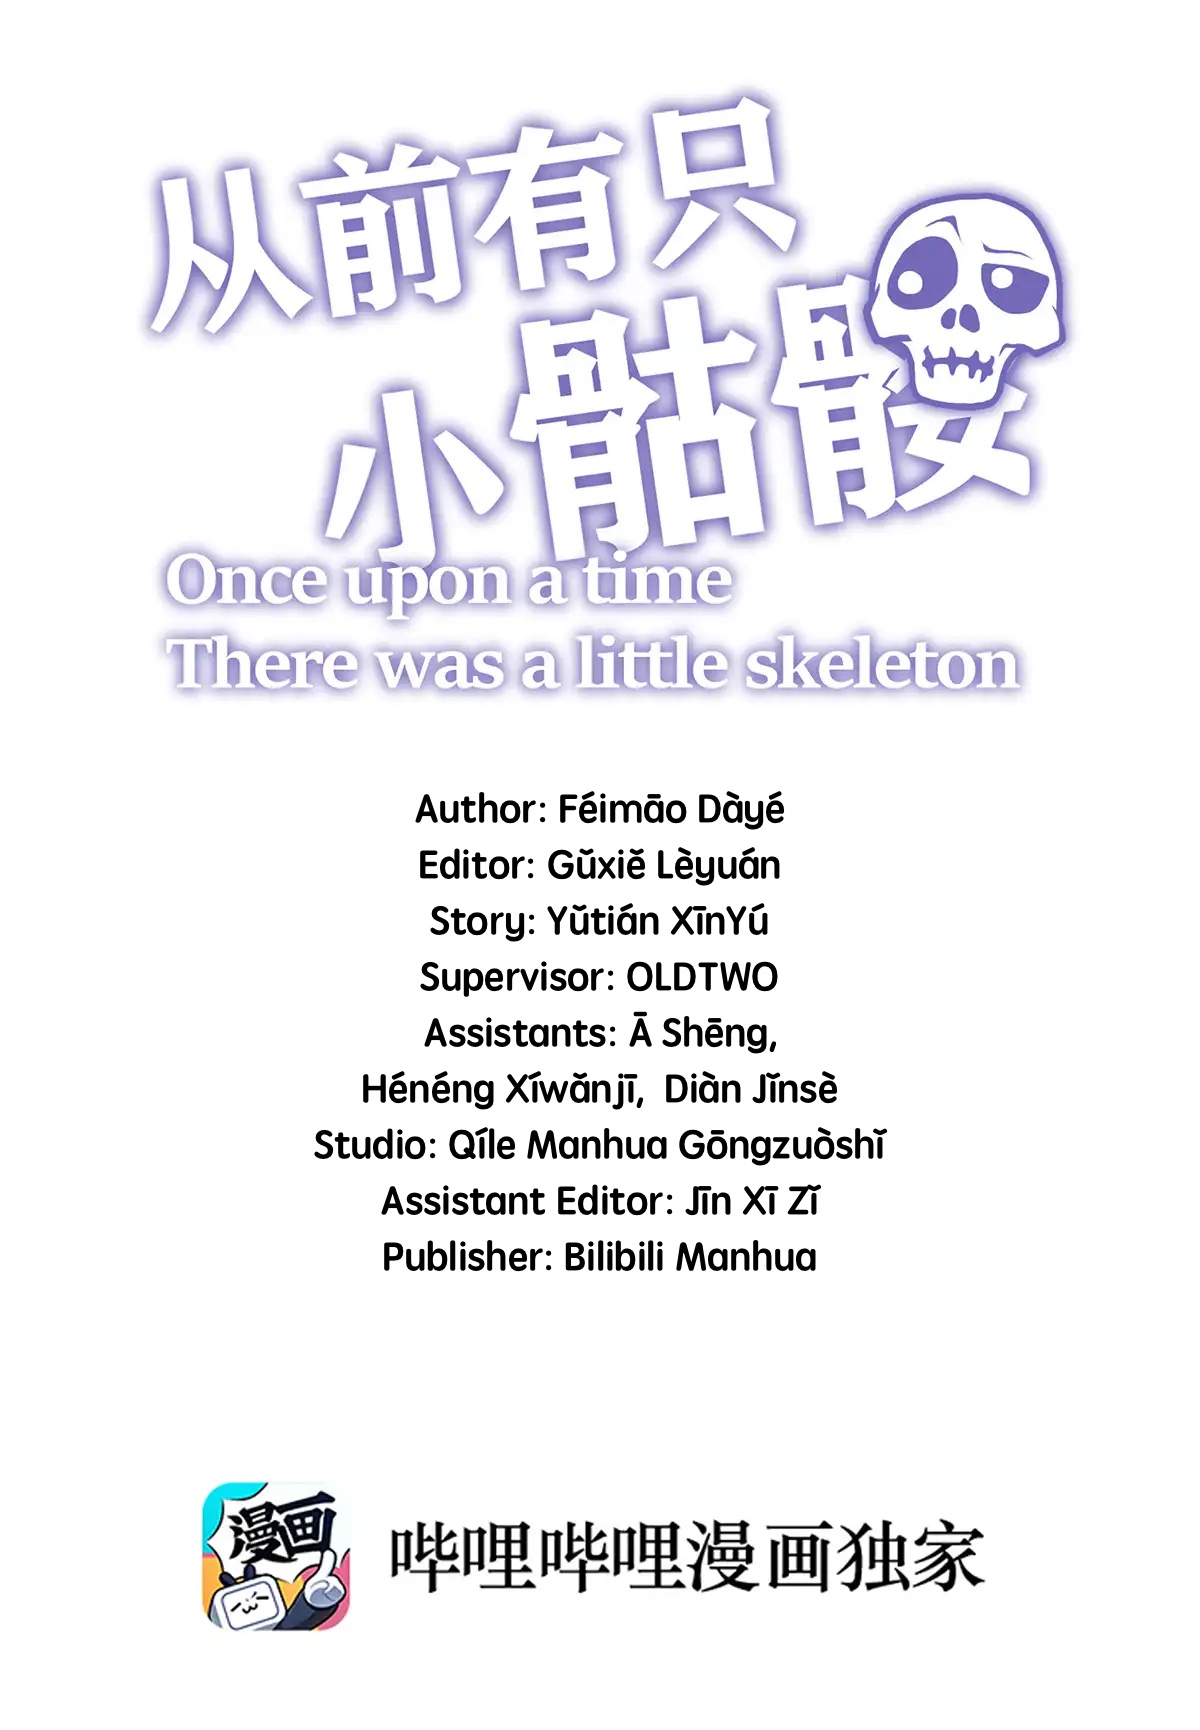 Little Skeleton Ch. 8 What's wrong with radish soup?